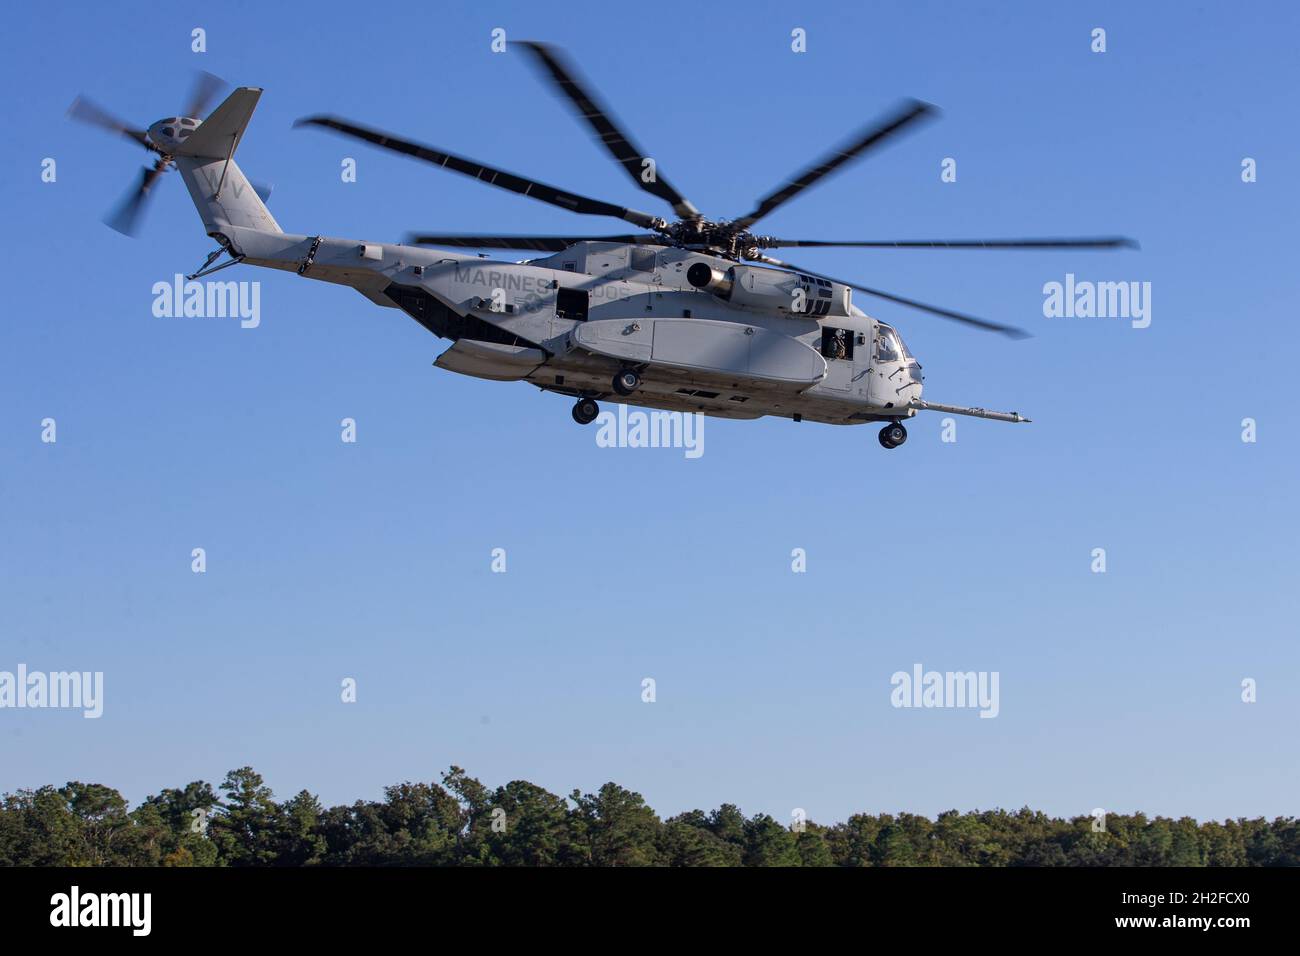 A CH-53K King Stallion assigned to Marine Operational Test and Evaluation Squadron (VMX) 1 transports Marines with 1st Battalion, 2nd Marine Regiment, at Marine Corps Auxiliary Landing Field Bogue, North Carolina, Oct. 20, 2021. The CH-53K King Stallion will replace the CH-53E Super Stallion, which has served the Marine Corps for 40 years, and will transport Marines, heavy equipment, and supplies during ship-to-shore movement in support of amphibious assault and subsequent operations ashore. (U.S. Marine Corps photo by Lance Cpl. Elias E. Pimentel III) Stock Photo